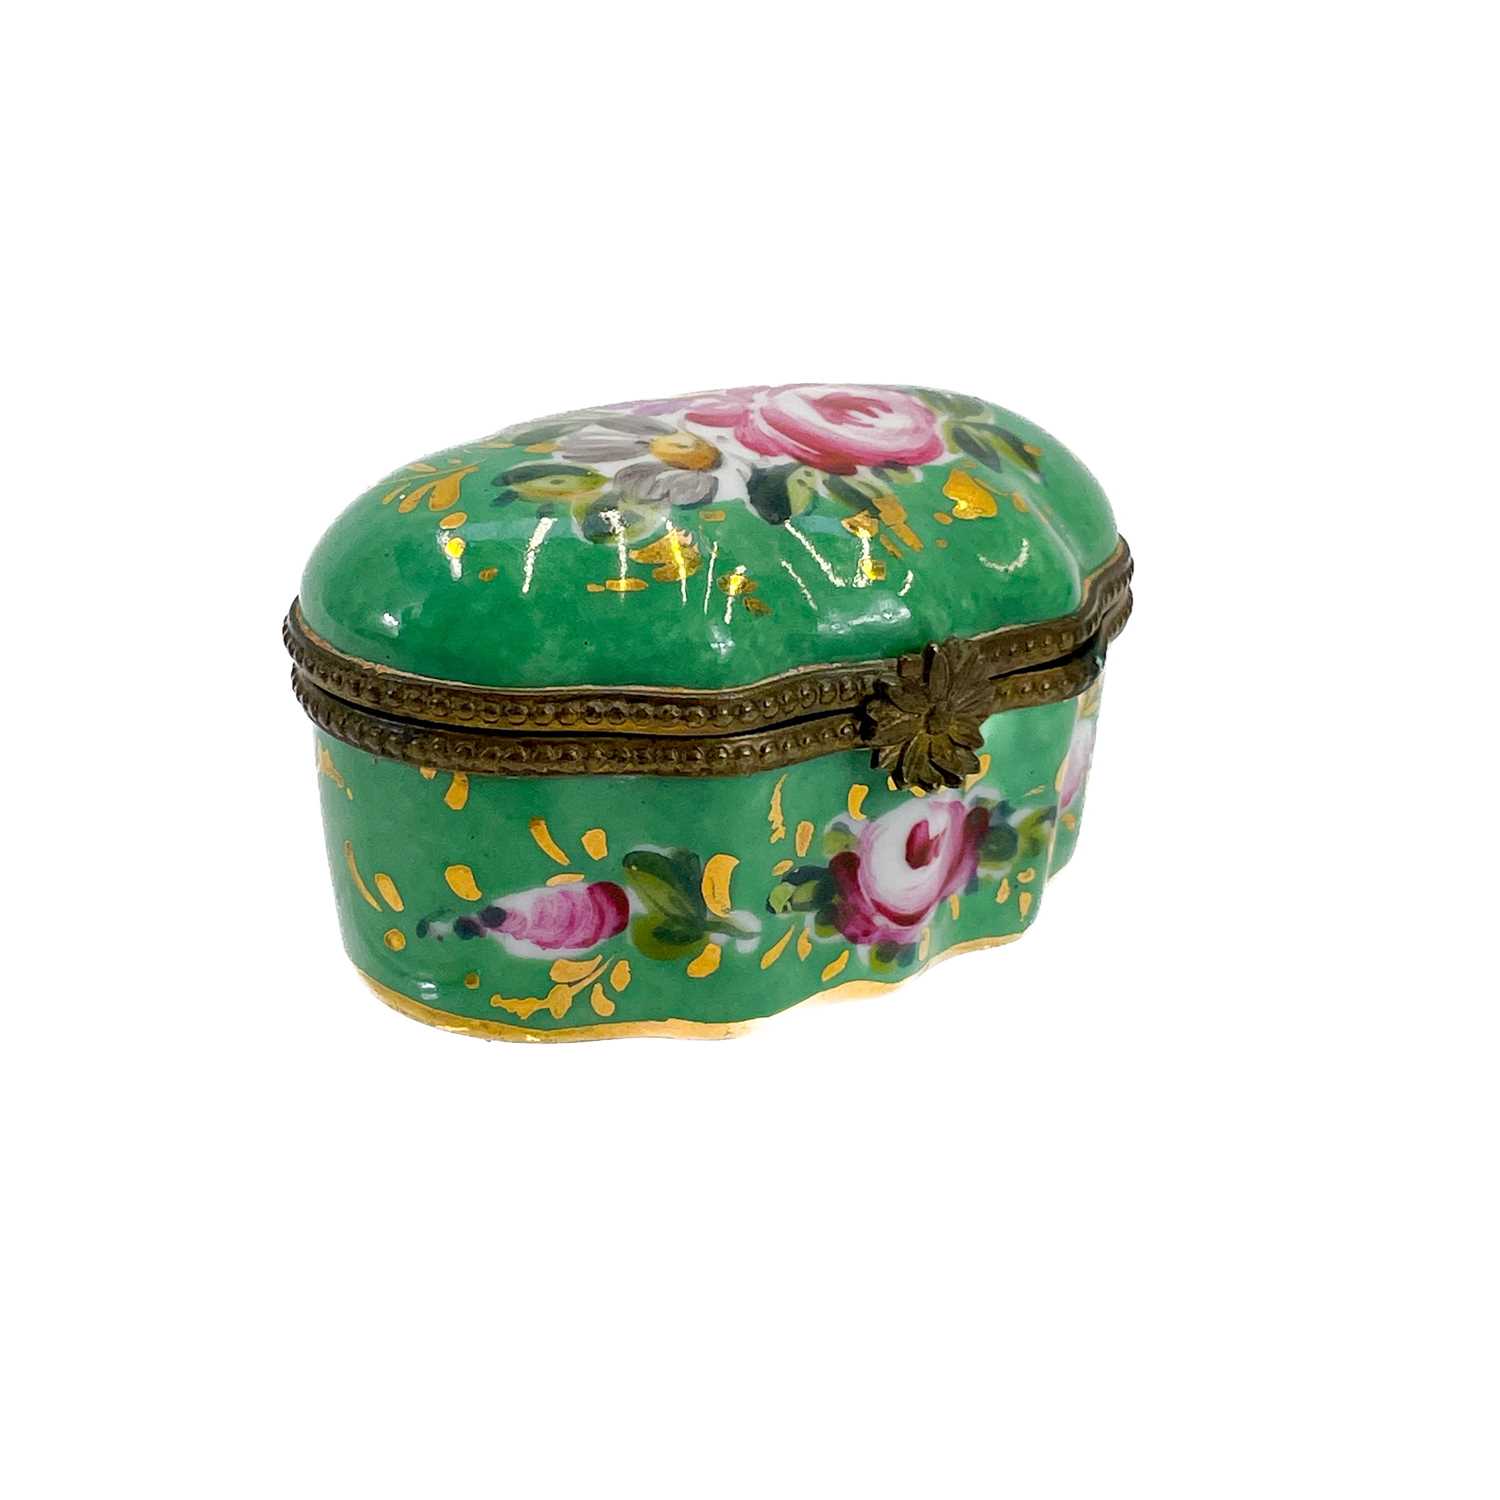 A French Limoges porcelain patch/pill box.